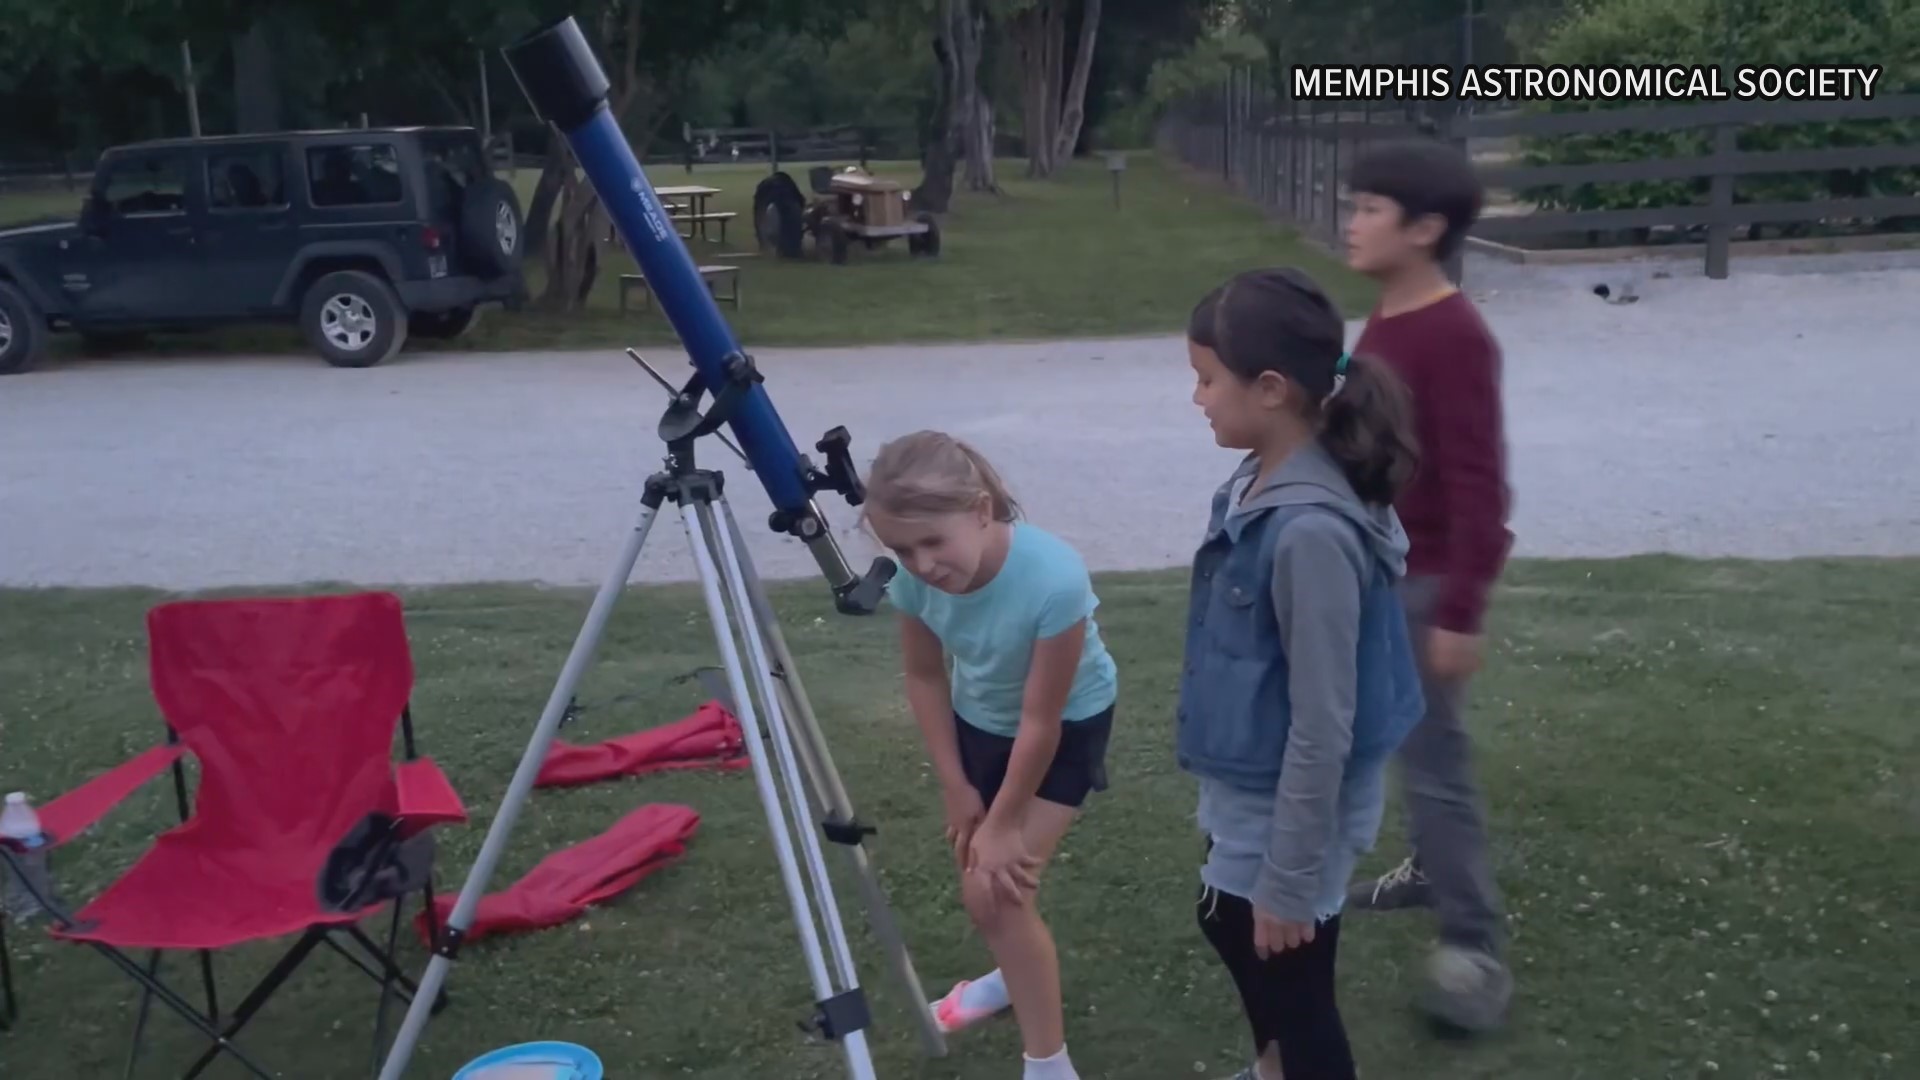 The Memphis Astronomical Society provides Memphians with the opportunity to get interested in space and the night sky.